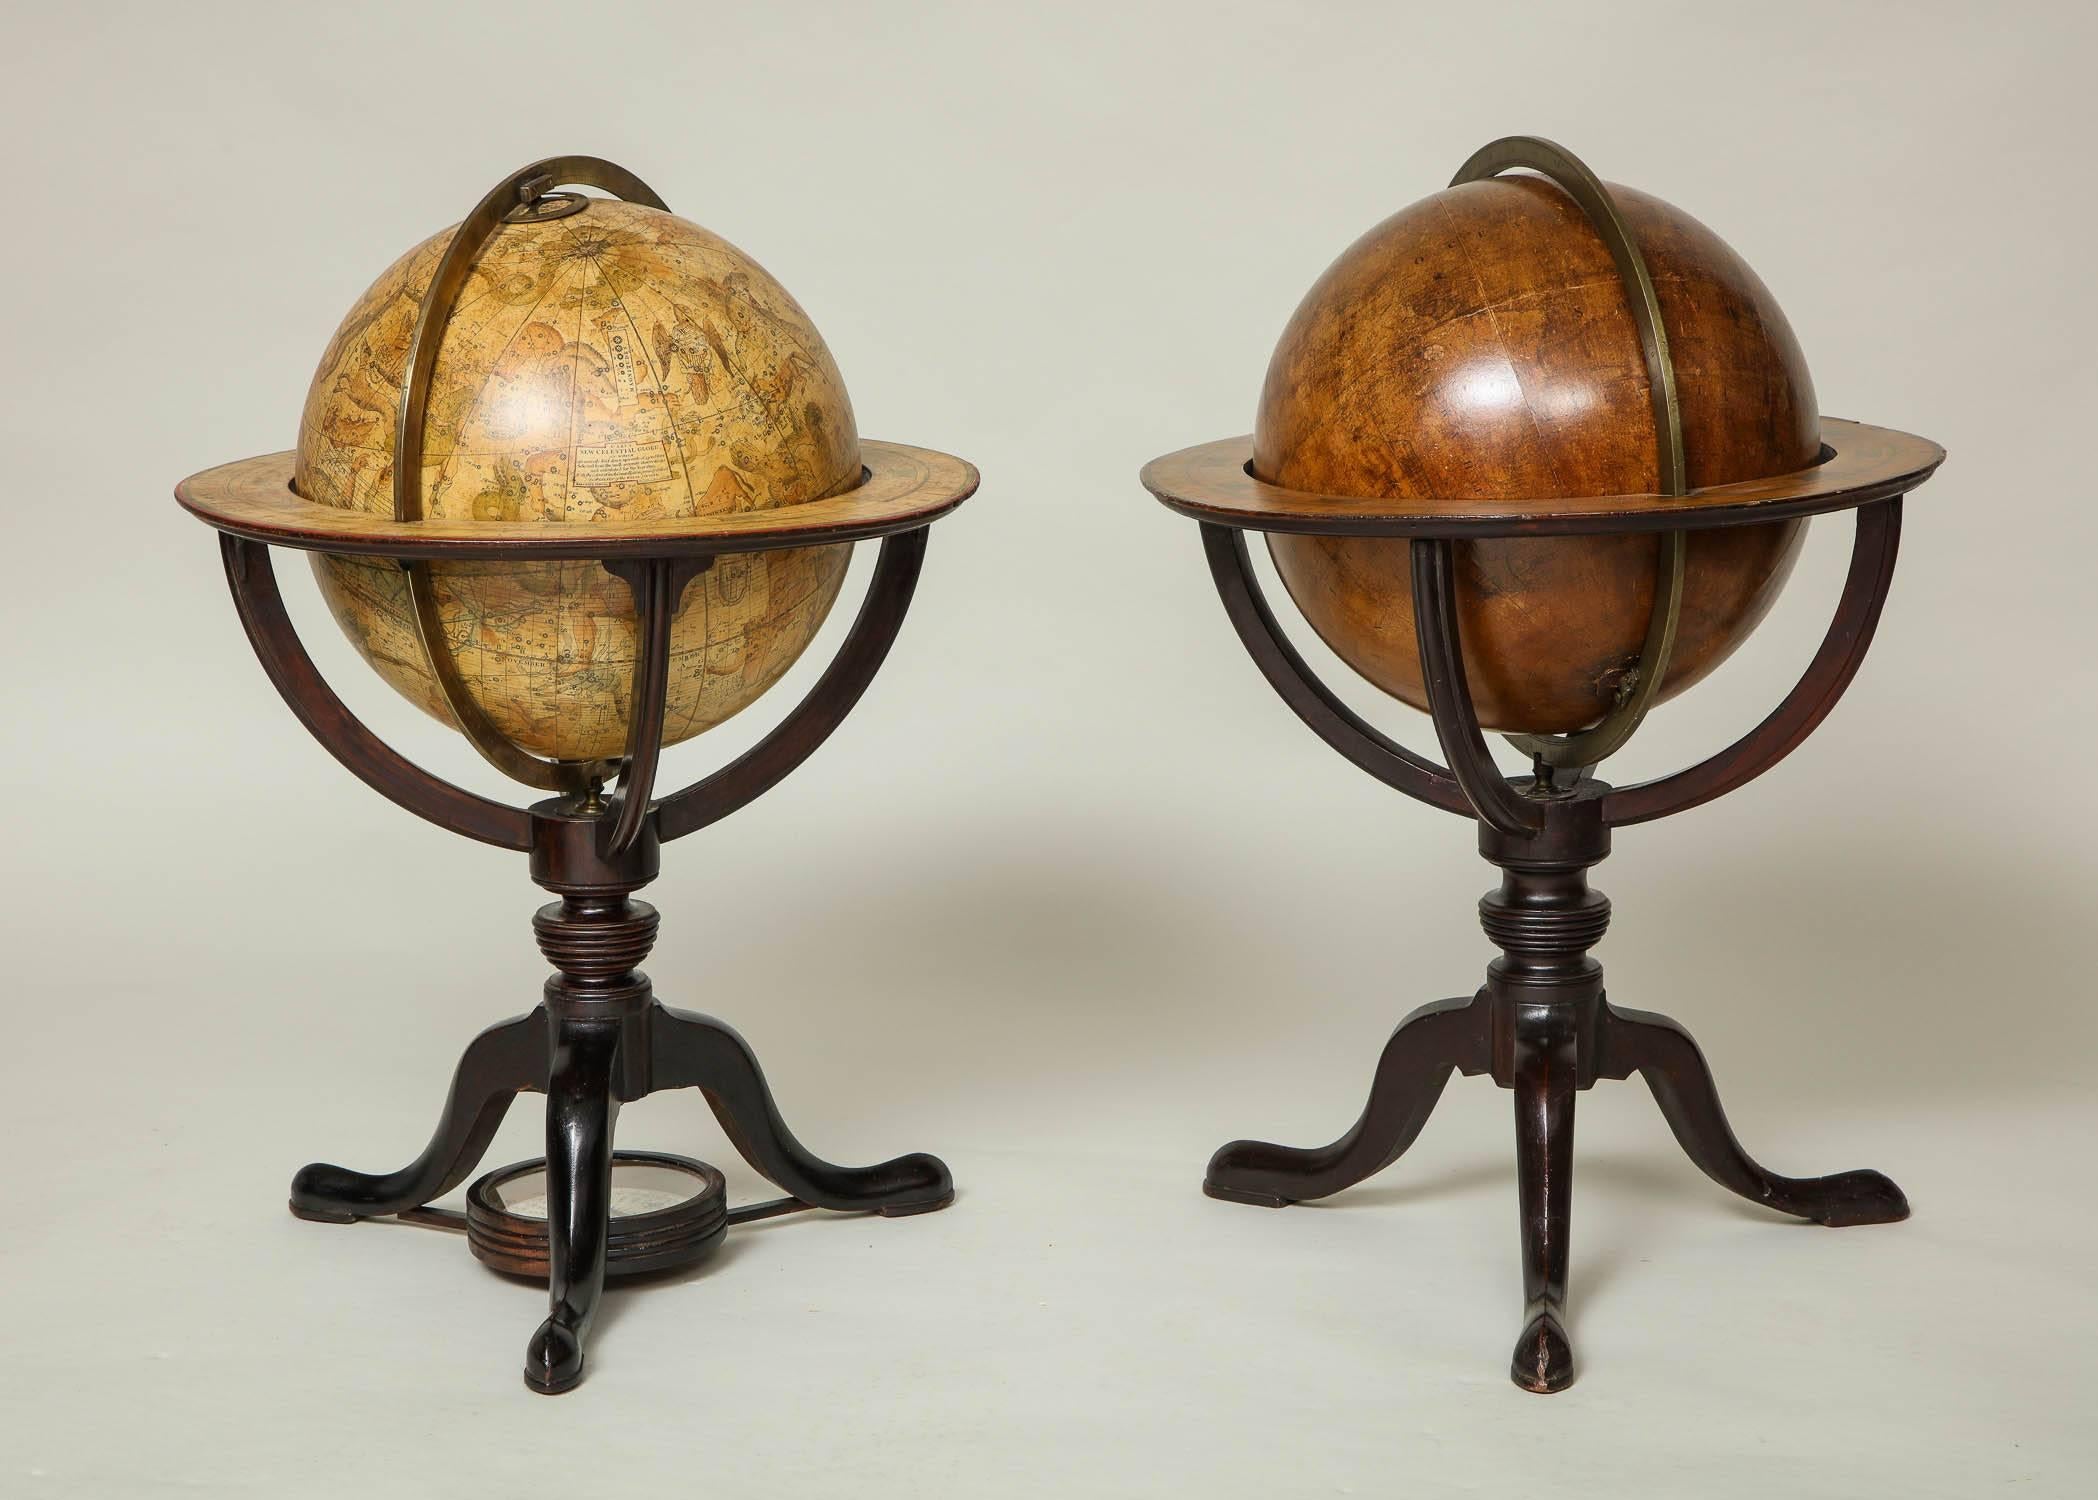 Fine assembled pair of Georgian terrestrial and celestial globes of very similar design in richly grained mahogany and with well designed near identical stands.

 The first: Fine Georgian Celestial globe by J. & W. Cary of London, circa 1800, the